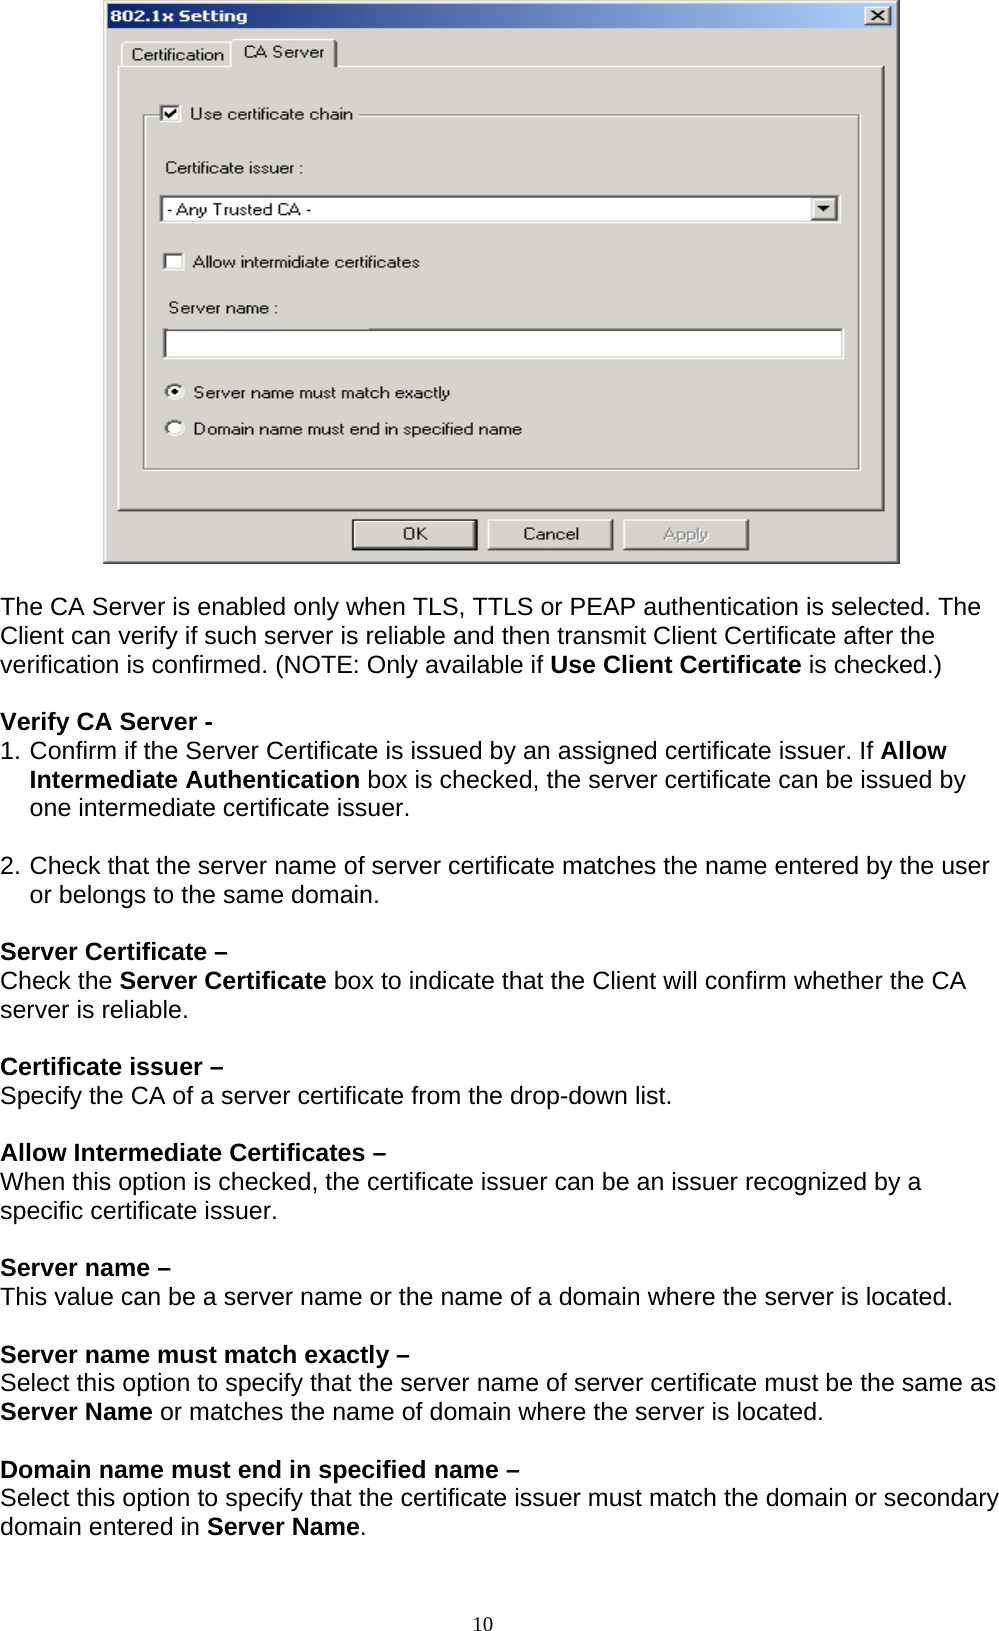 10     The CA Server is enabled only when TLS, TTLS or PEAP authentication is selected. The Client can verify if such server is reliable and then transmit Client Certificate after the verification is confirmed. (NOTE: Only available if Use Client Certificate is checked.)  Verify CA Server -   1. Confirm if the Server Certificate is issued by an assigned certificate issuer. If Allow Intermediate Authentication box is checked, the server certificate can be issued by one intermediate certificate issuer.  2. Check that the server name of server certificate matches the name entered by the user or belongs to the same domain.  Server Certificate –   Check the Server Certificate box to indicate that the Client will confirm whether the CA server is reliable.  Certificate issuer –   Specify the CA of a server certificate from the drop-down list.  Allow Intermediate Certificates –   When this option is checked, the certificate issuer can be an issuer recognized by a specific certificate issuer.    Server name –   This value can be a server name or the name of a domain where the server is located.  Server name must match exactly –   Select this option to specify that the server name of server certificate must be the same as Server Name or matches the name of domain where the server is located.  Domain name must end in specified name –   Select this option to specify that the certificate issuer must match the domain or secondary domain entered in Server Name.  